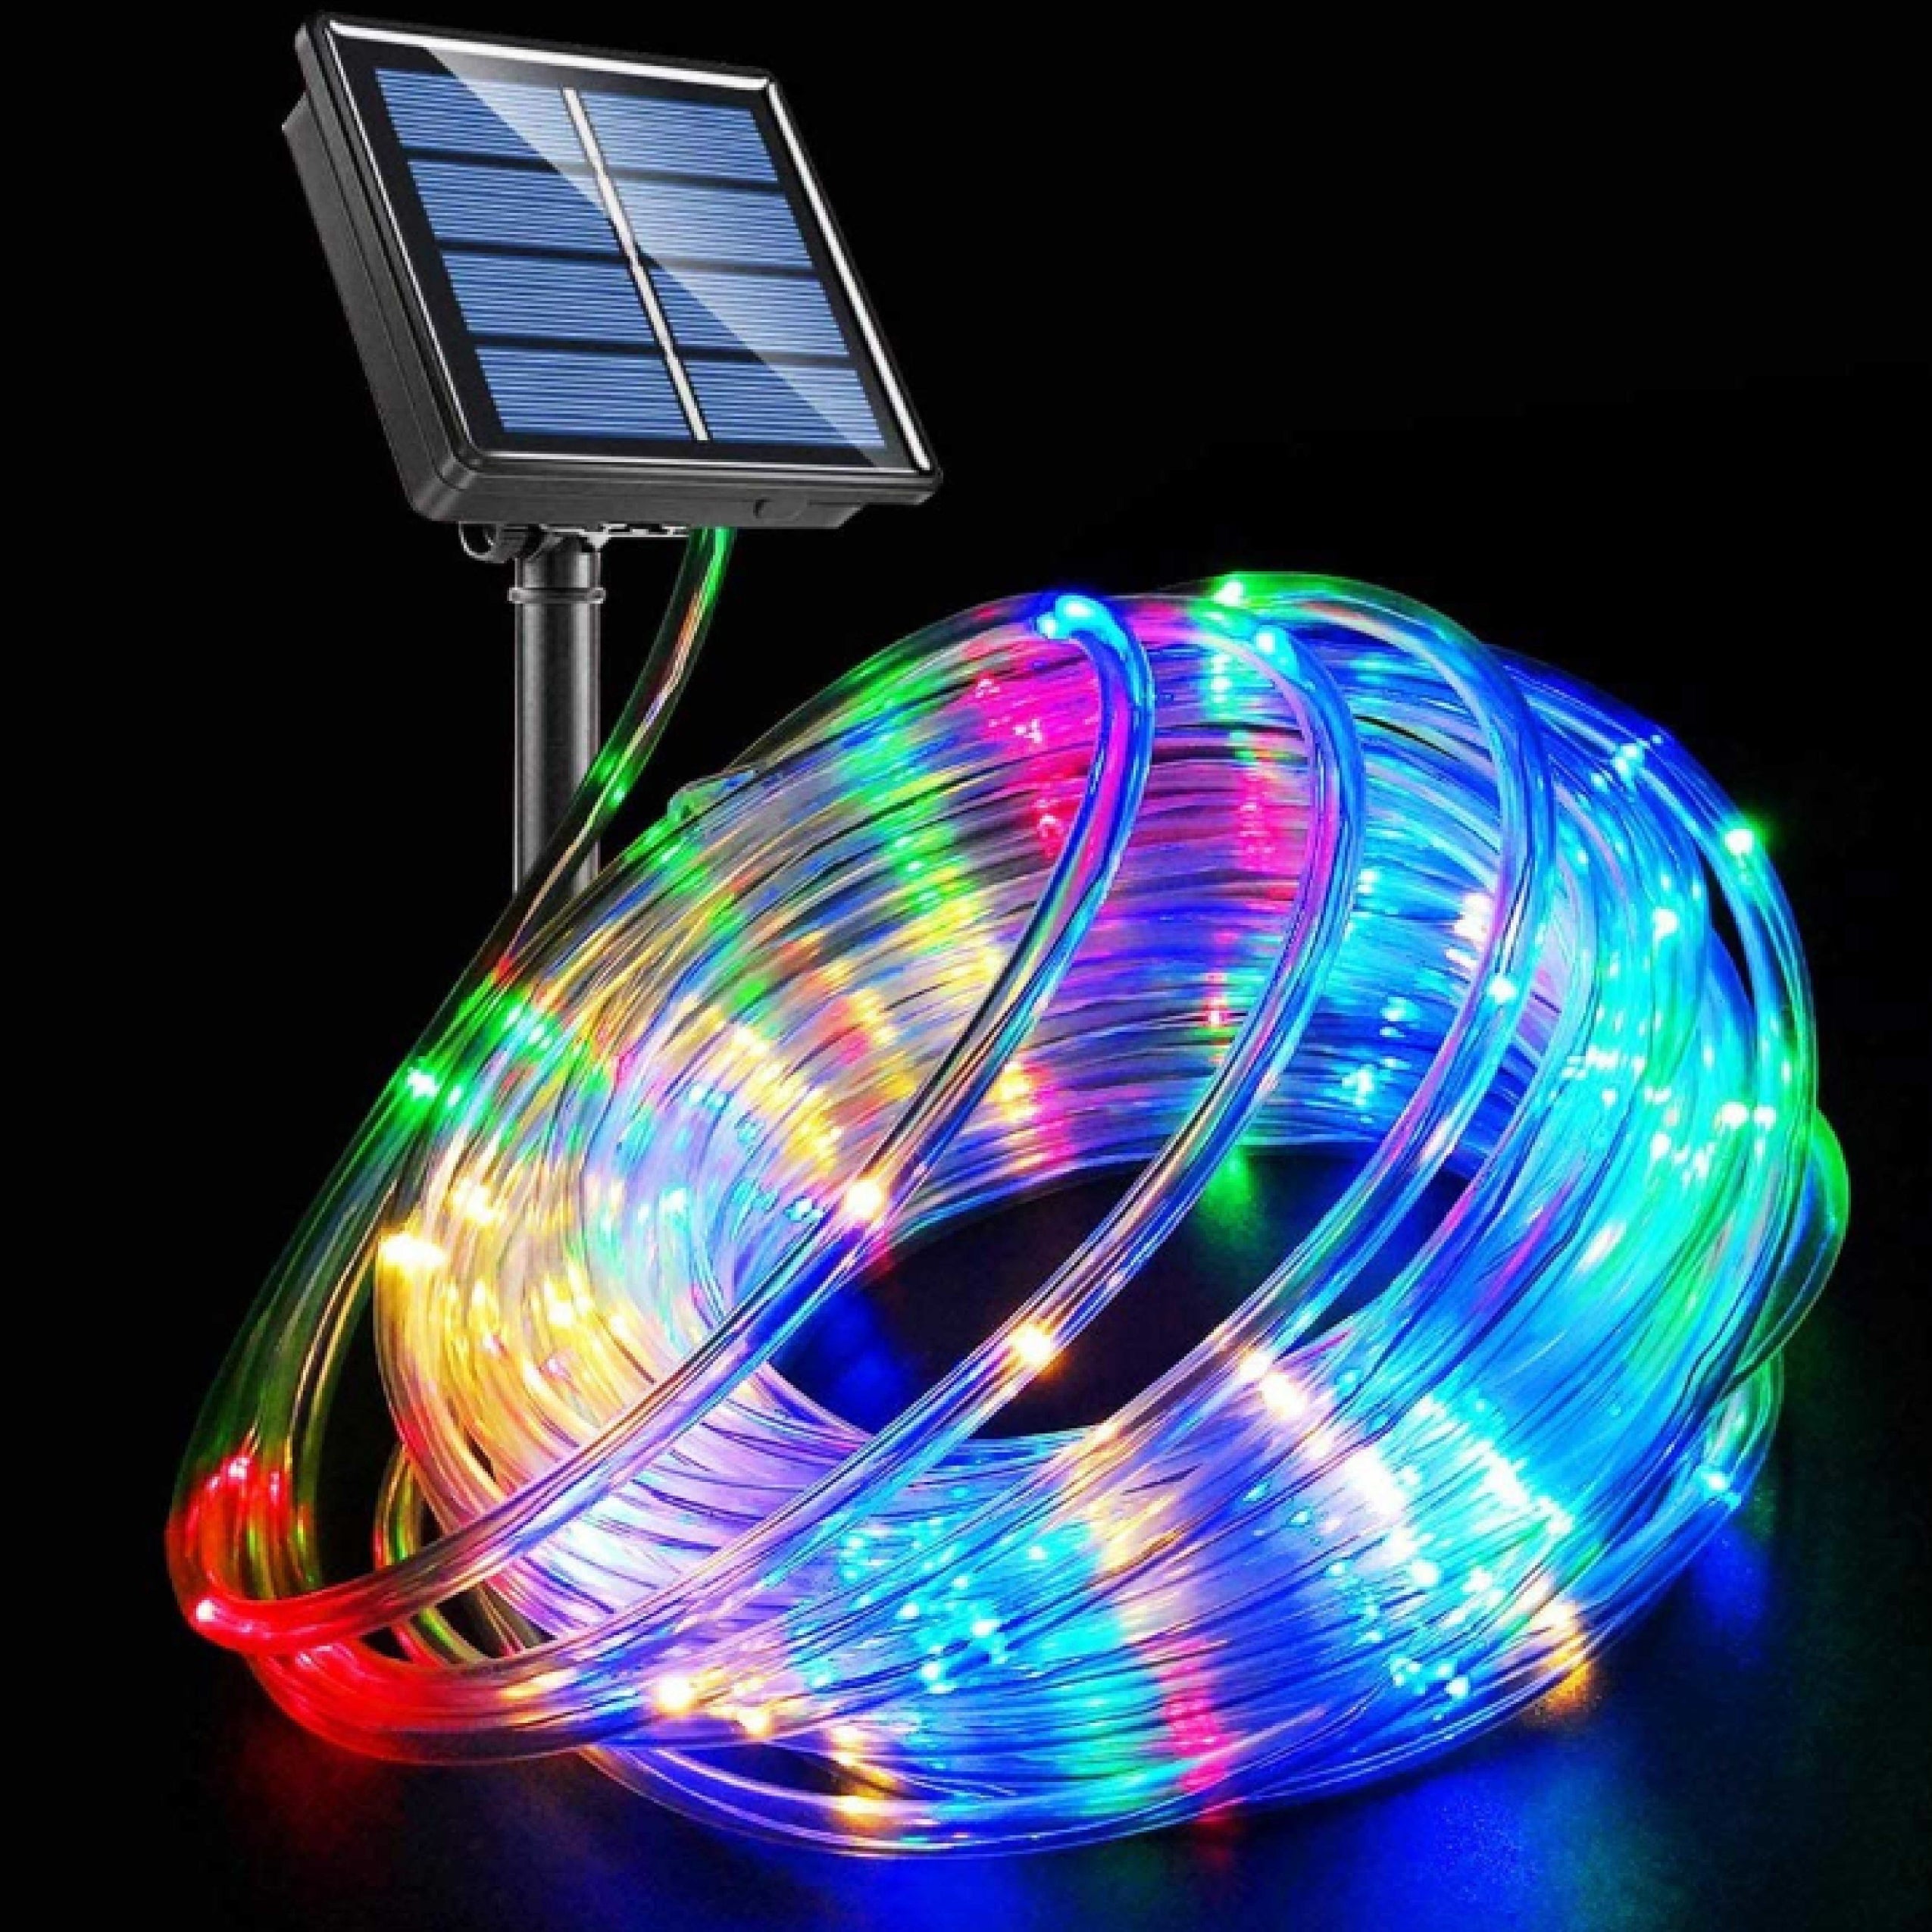 Bell + Howell 50' Bionic Color Changing Solar Powered Rope Lights - 50 FEET